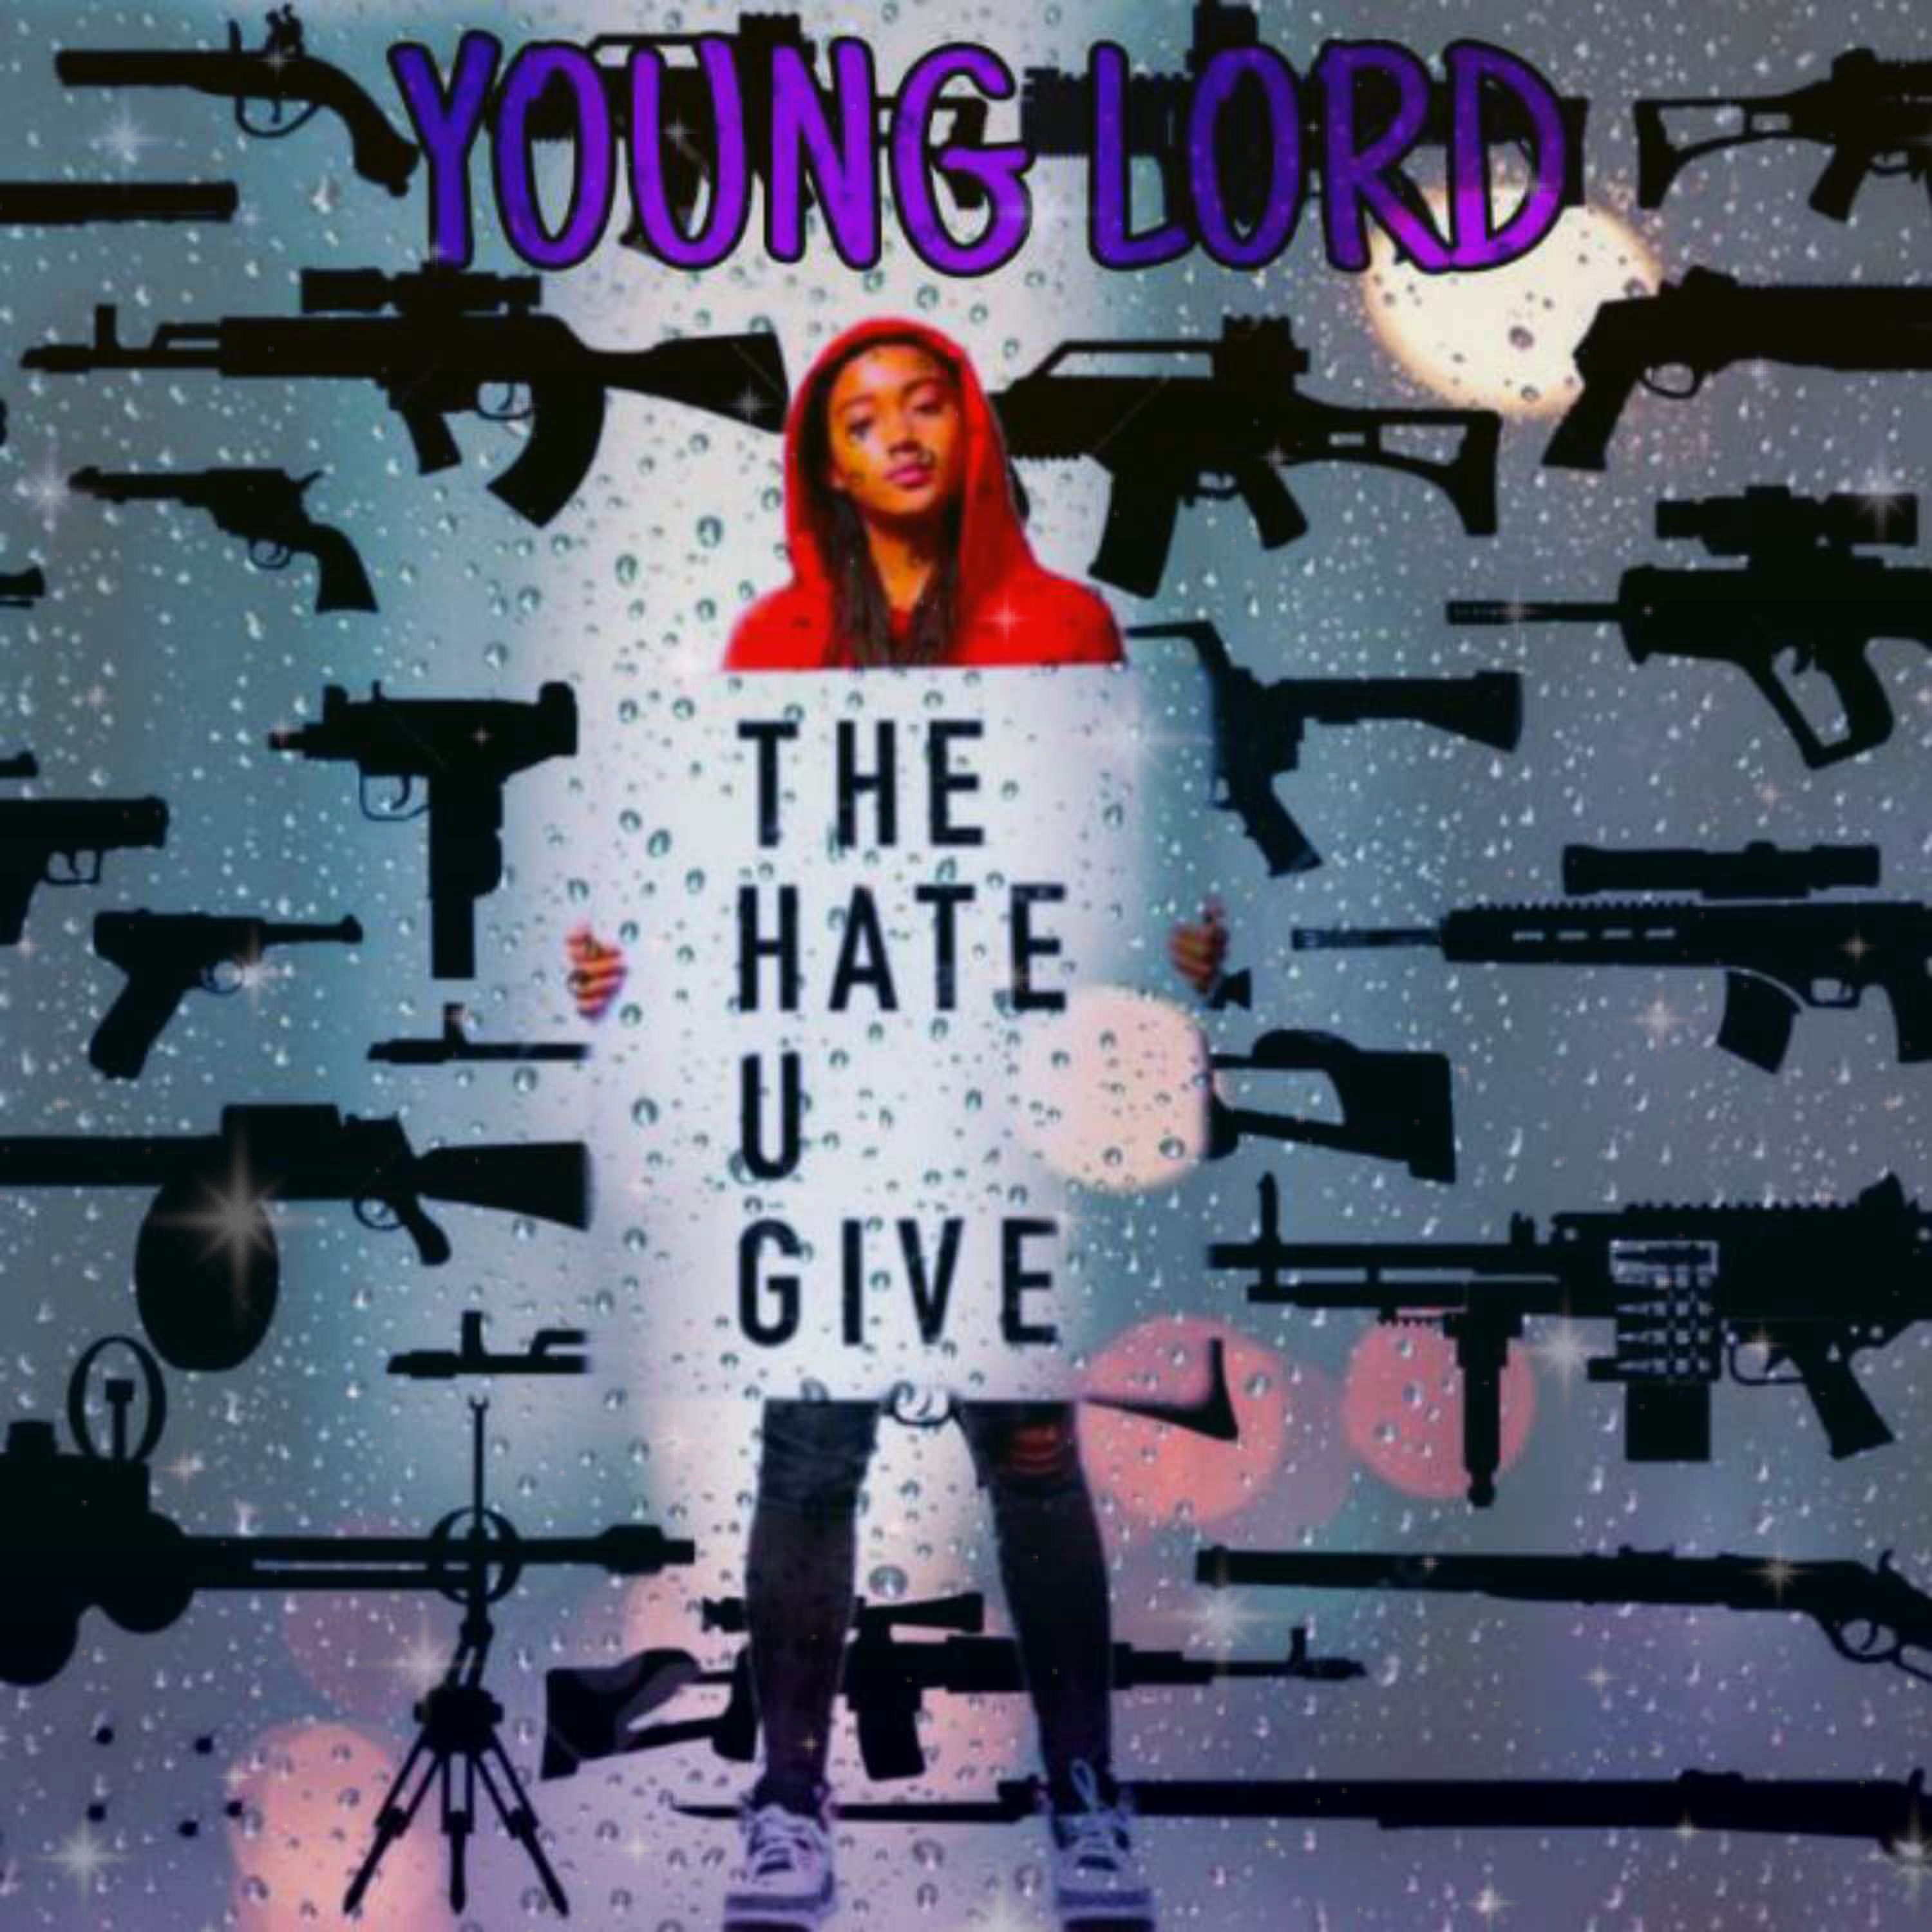 The hate you gave me  Image